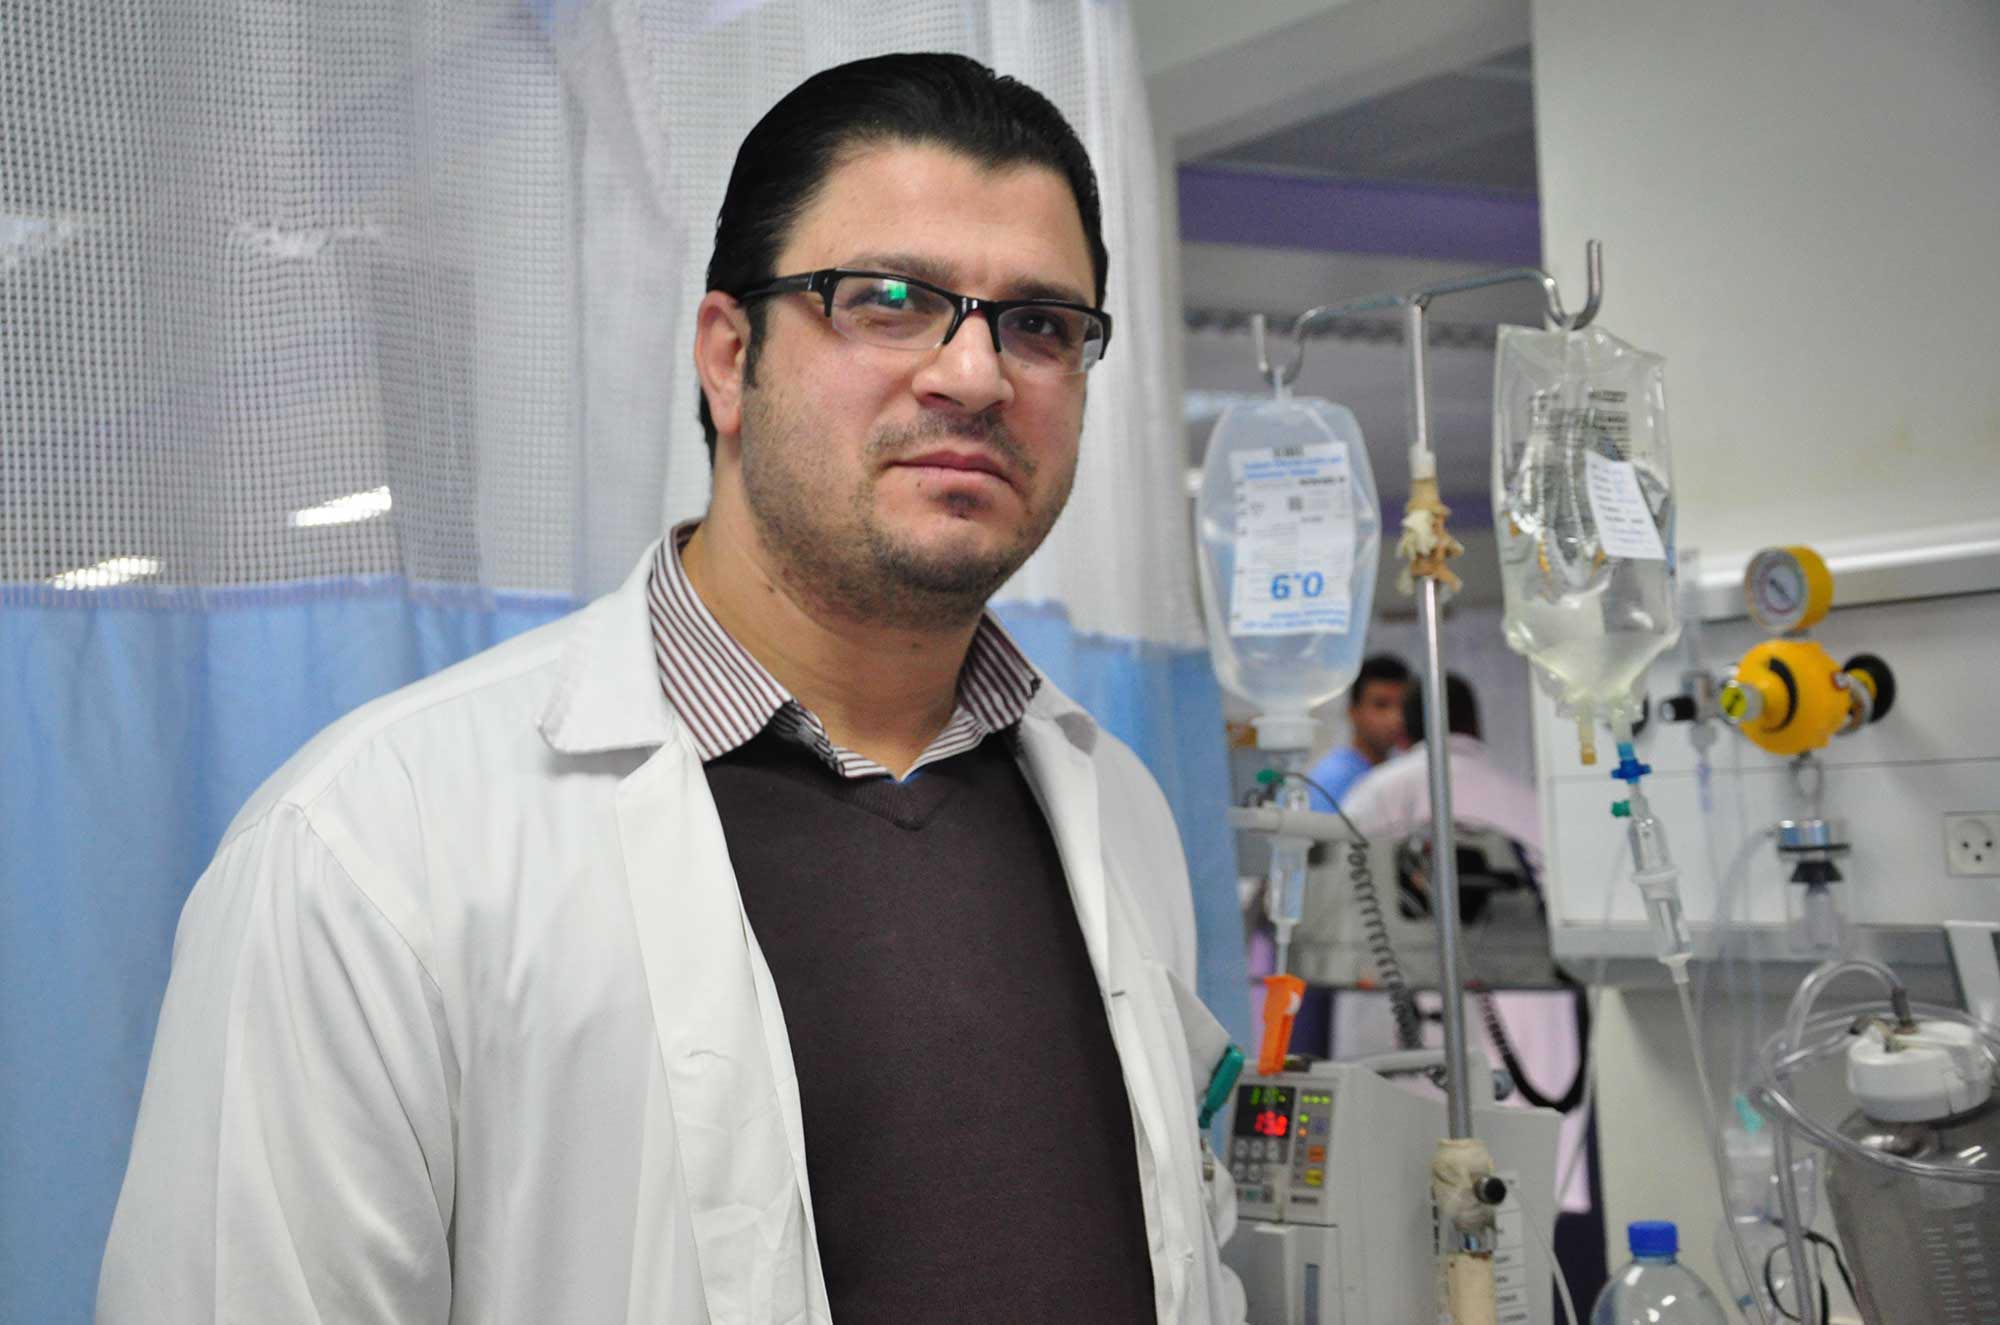 Dr. Abd Al-Wadood Abu-Haikal primarily attributes the large number of cholesterol patients in West Bank hospitals to lack of exercise and fatty diets.